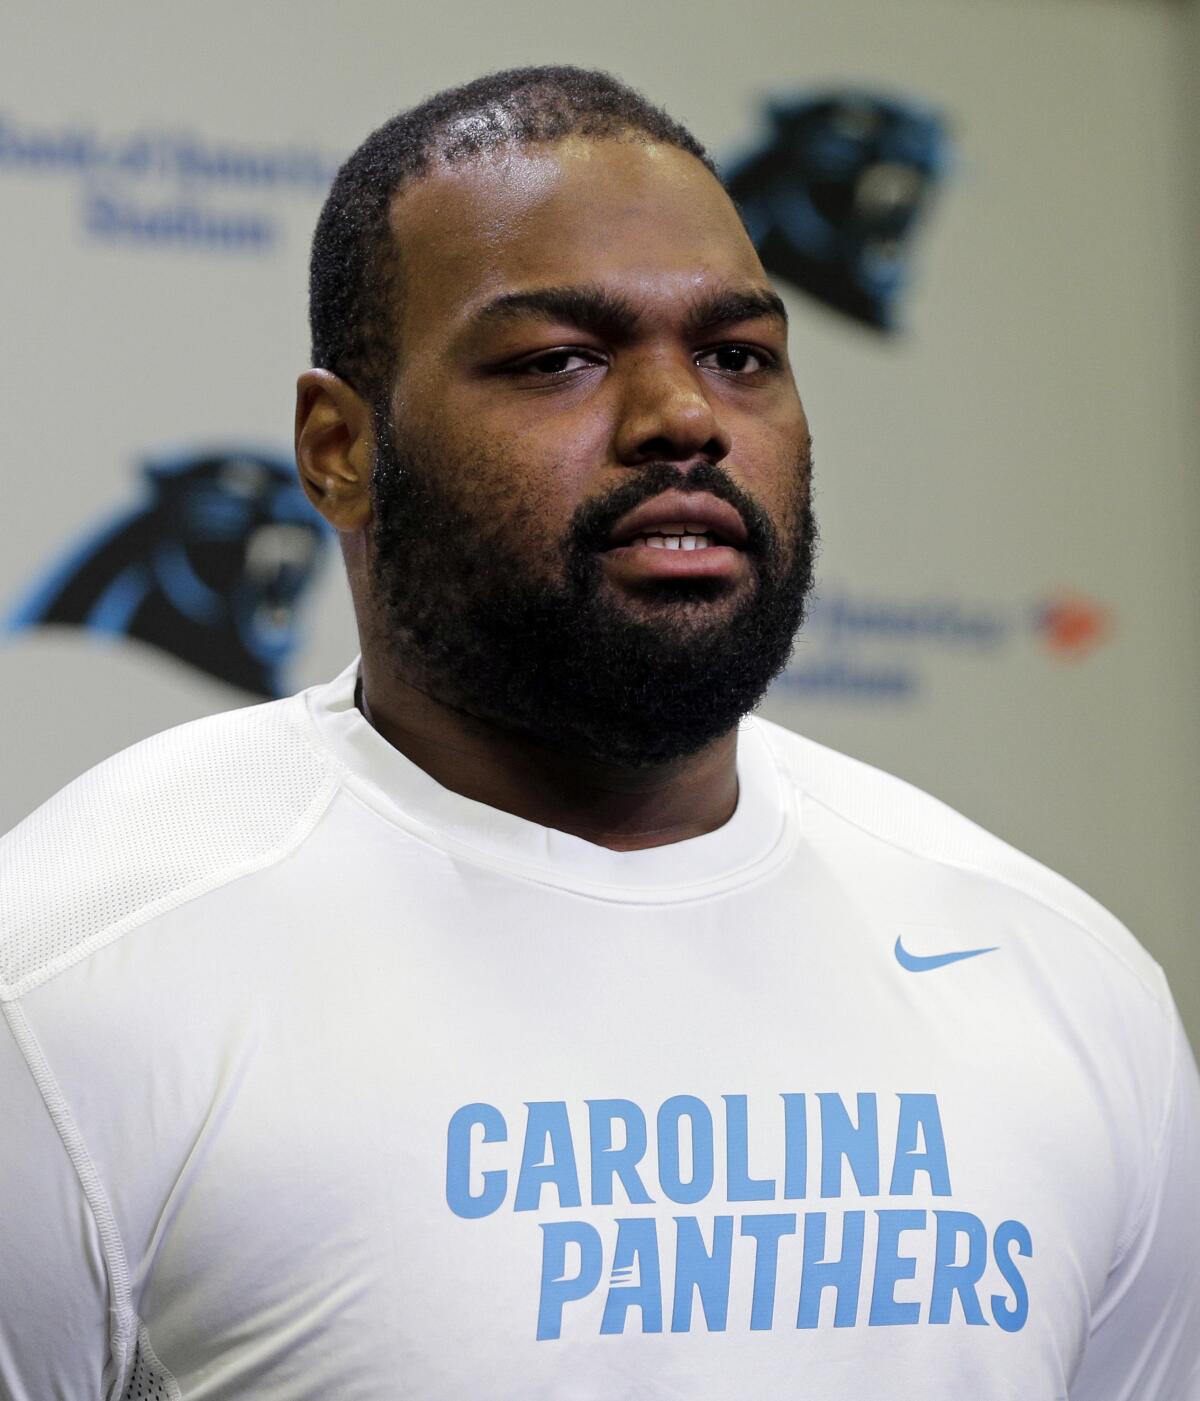 Michael Oher poses in a white Carolina Panthers shirt